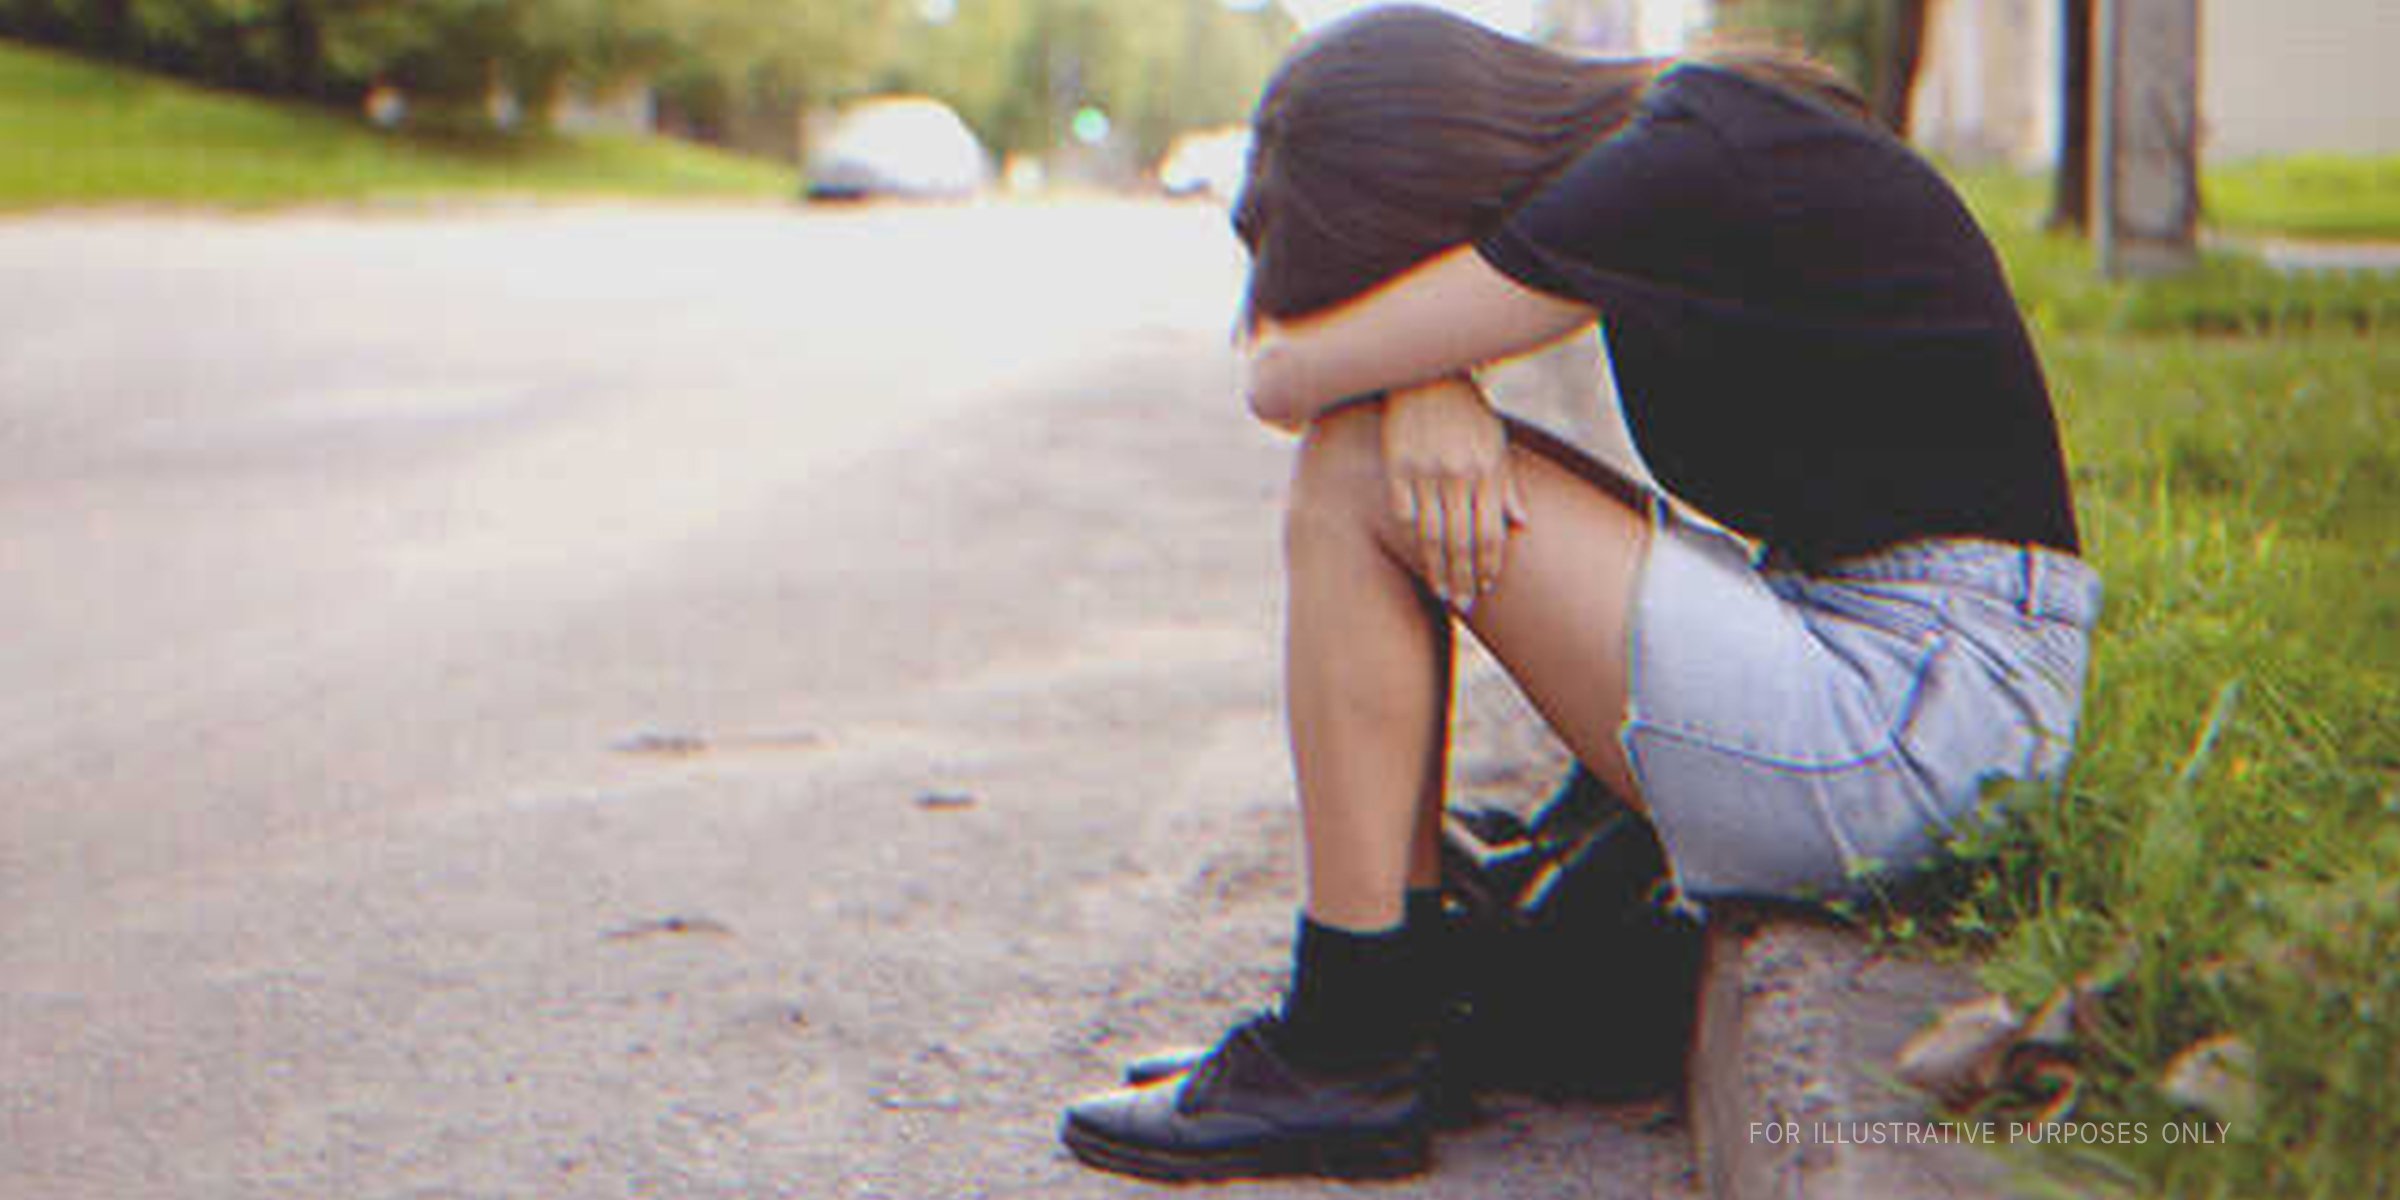 Girl Crying On The Side Of The Road. | Source: Shutterstock